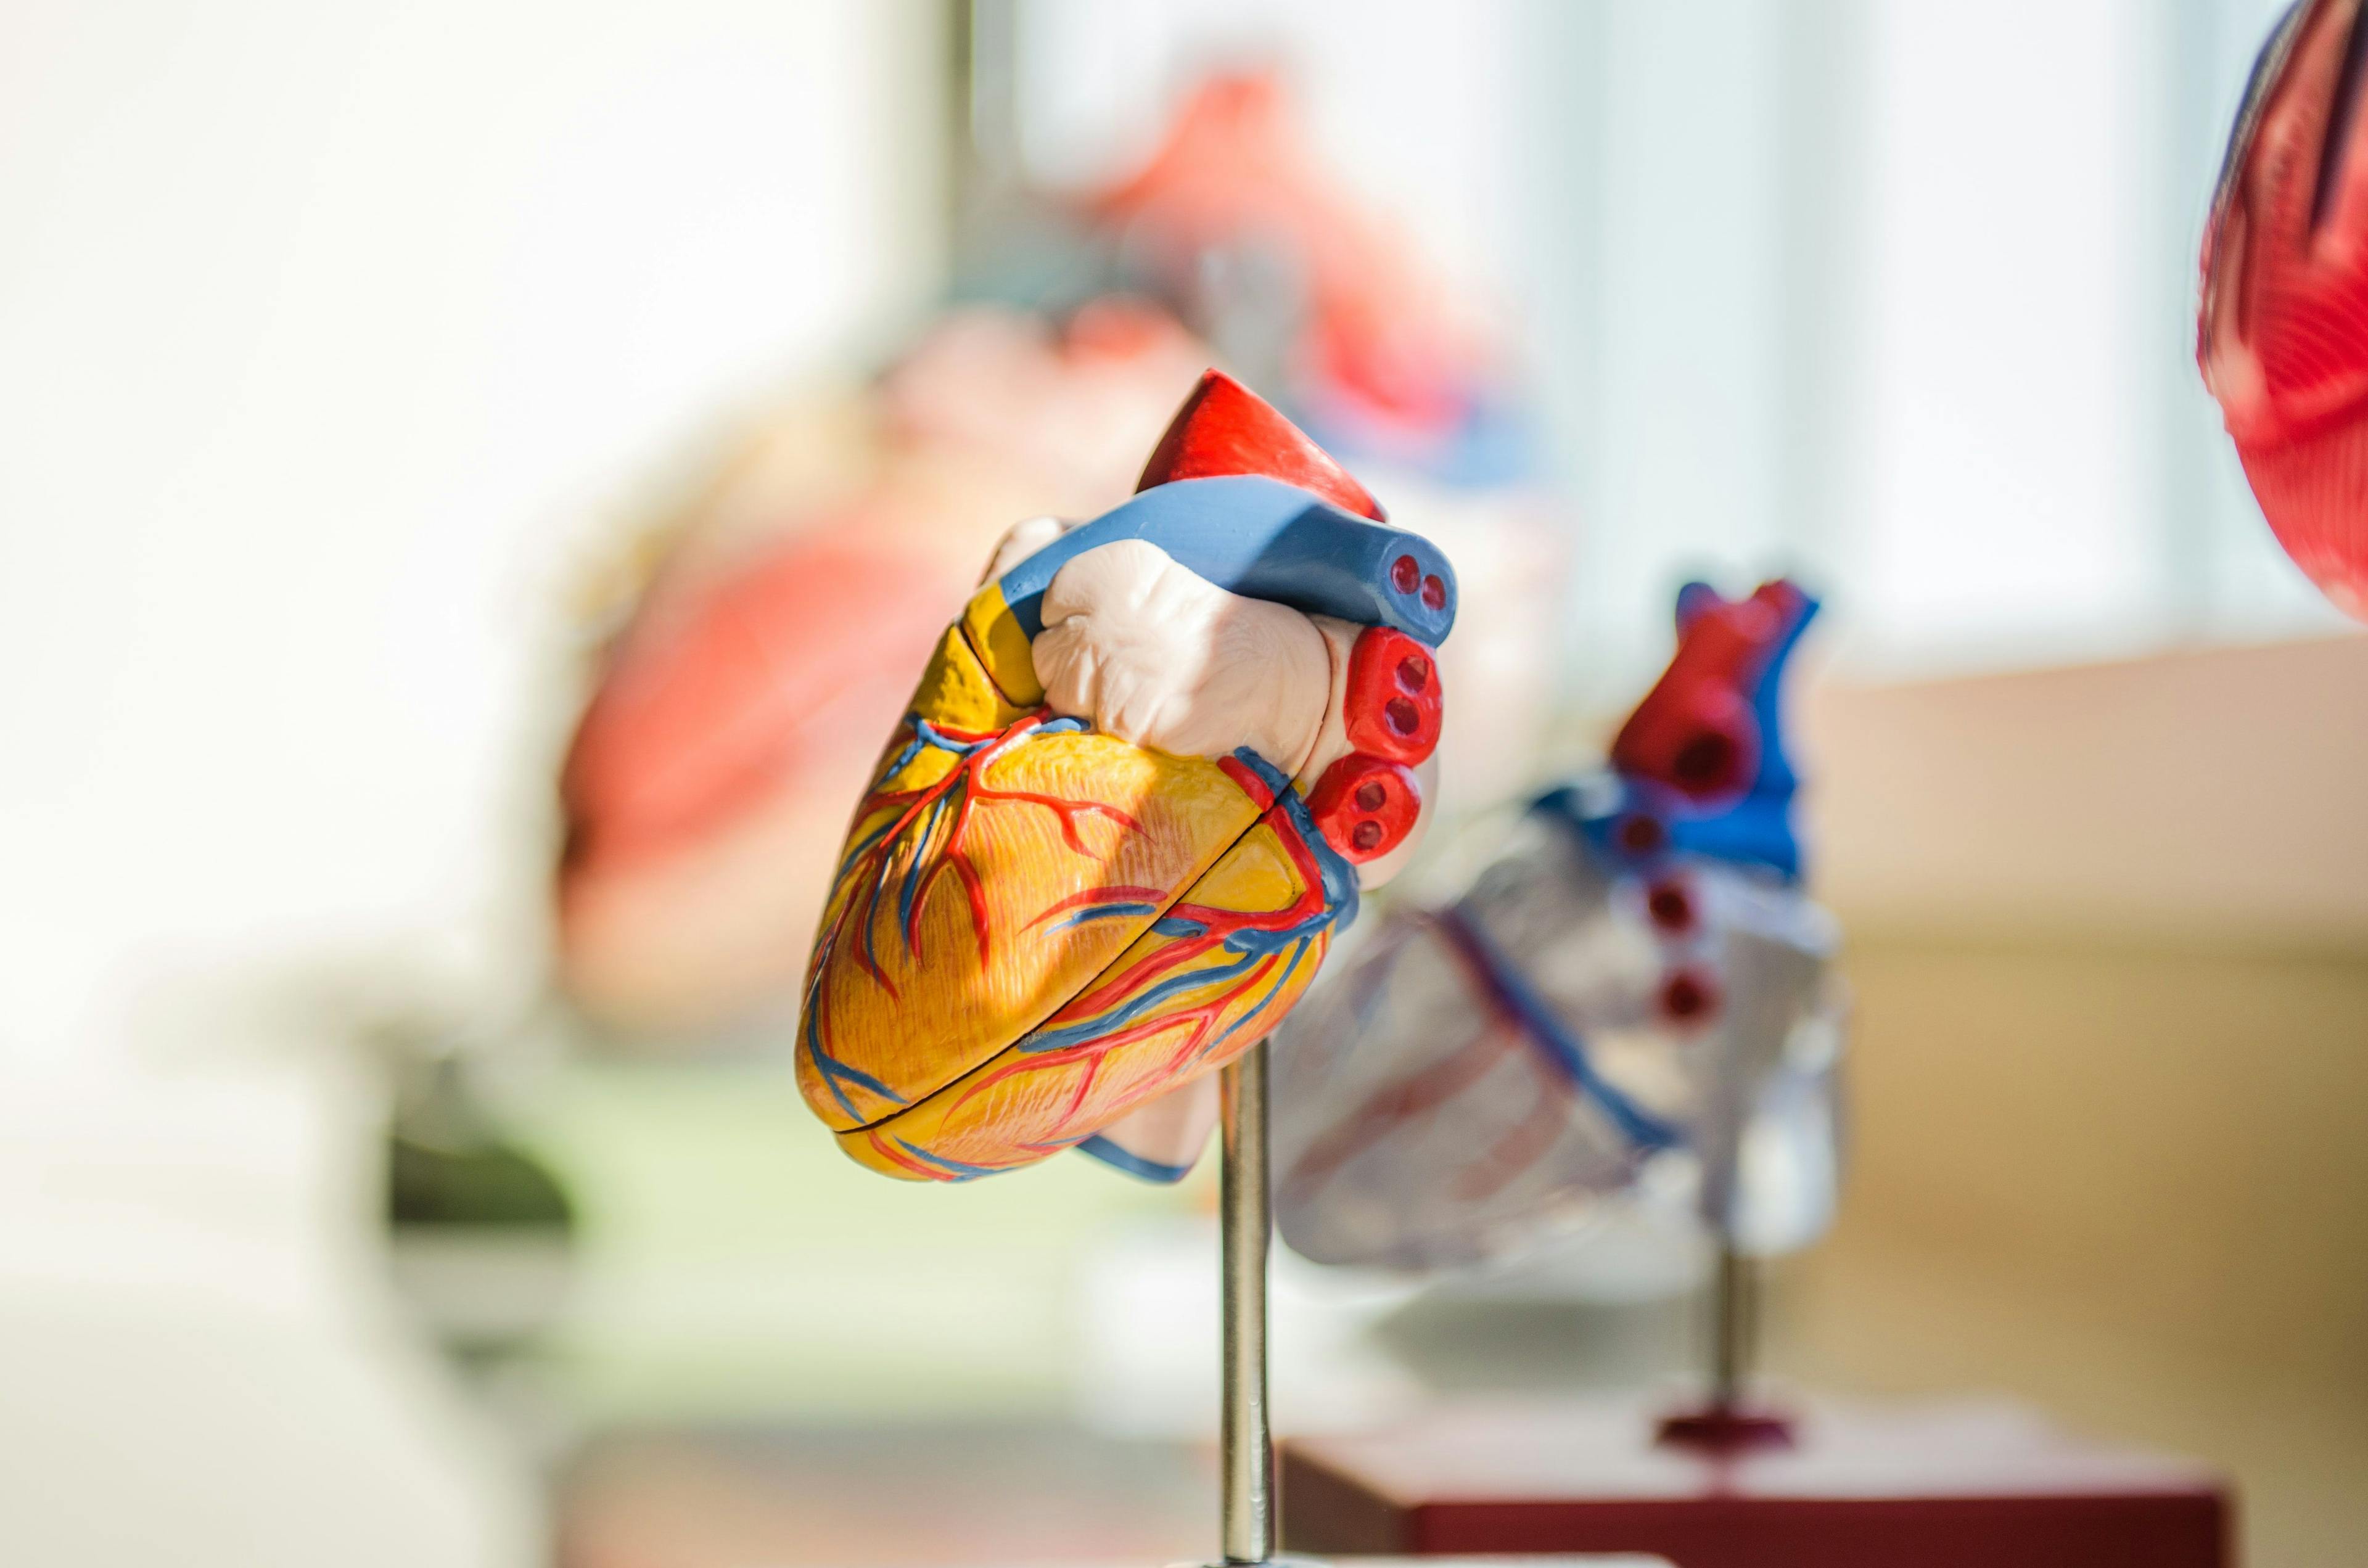 Early Evolocumab Cuts LDL-C in Post-PCI Patients with Acute Myocardial Infarction